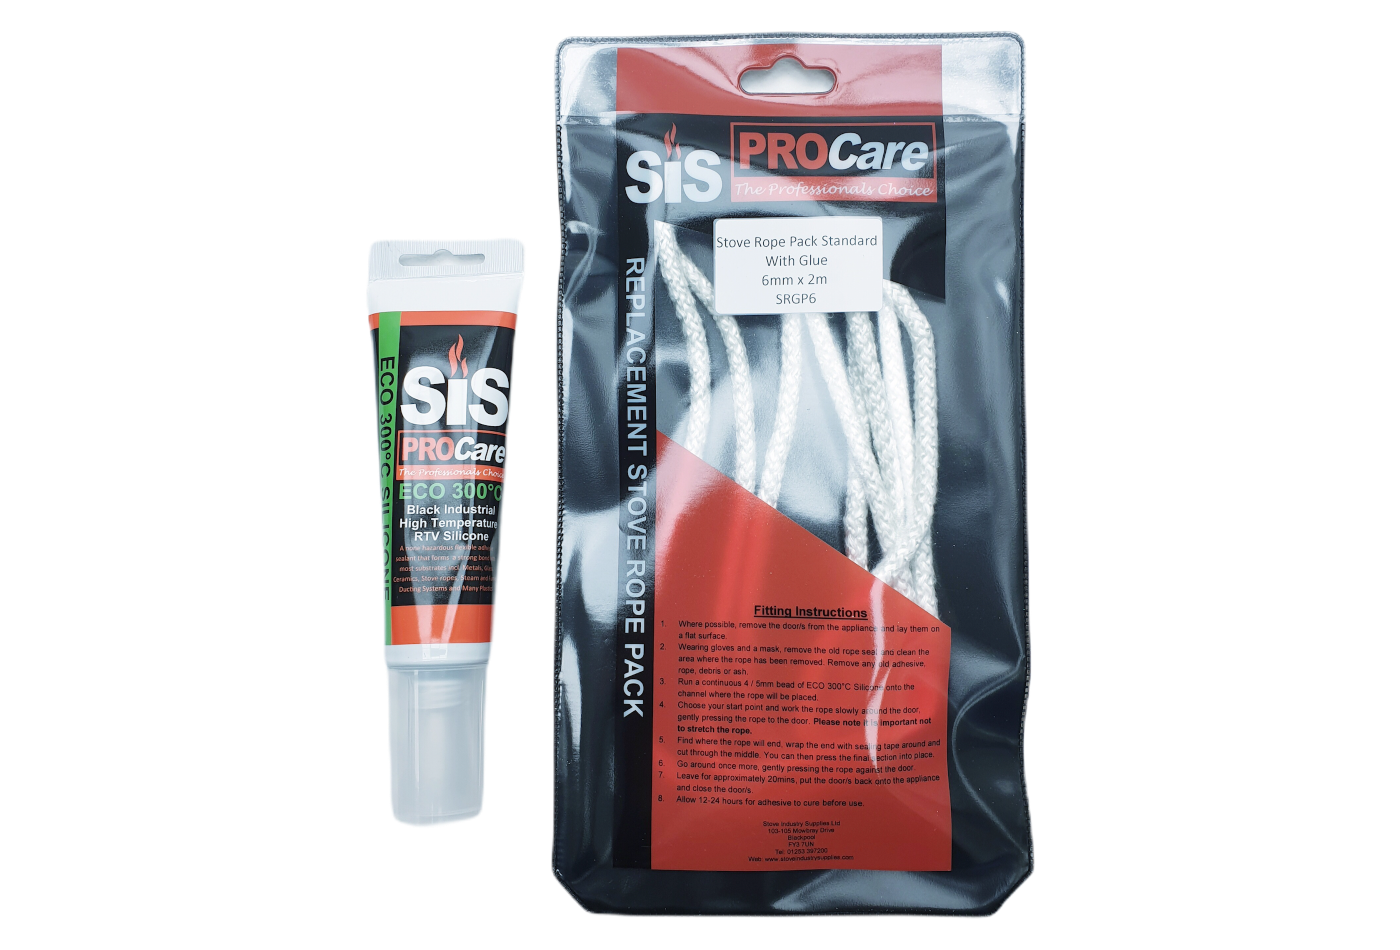 SiS Procare White 6 milimetre x 2 metre Standard Stove Rope & 80 millilitre Rope Glue Pack - product code SRGP6